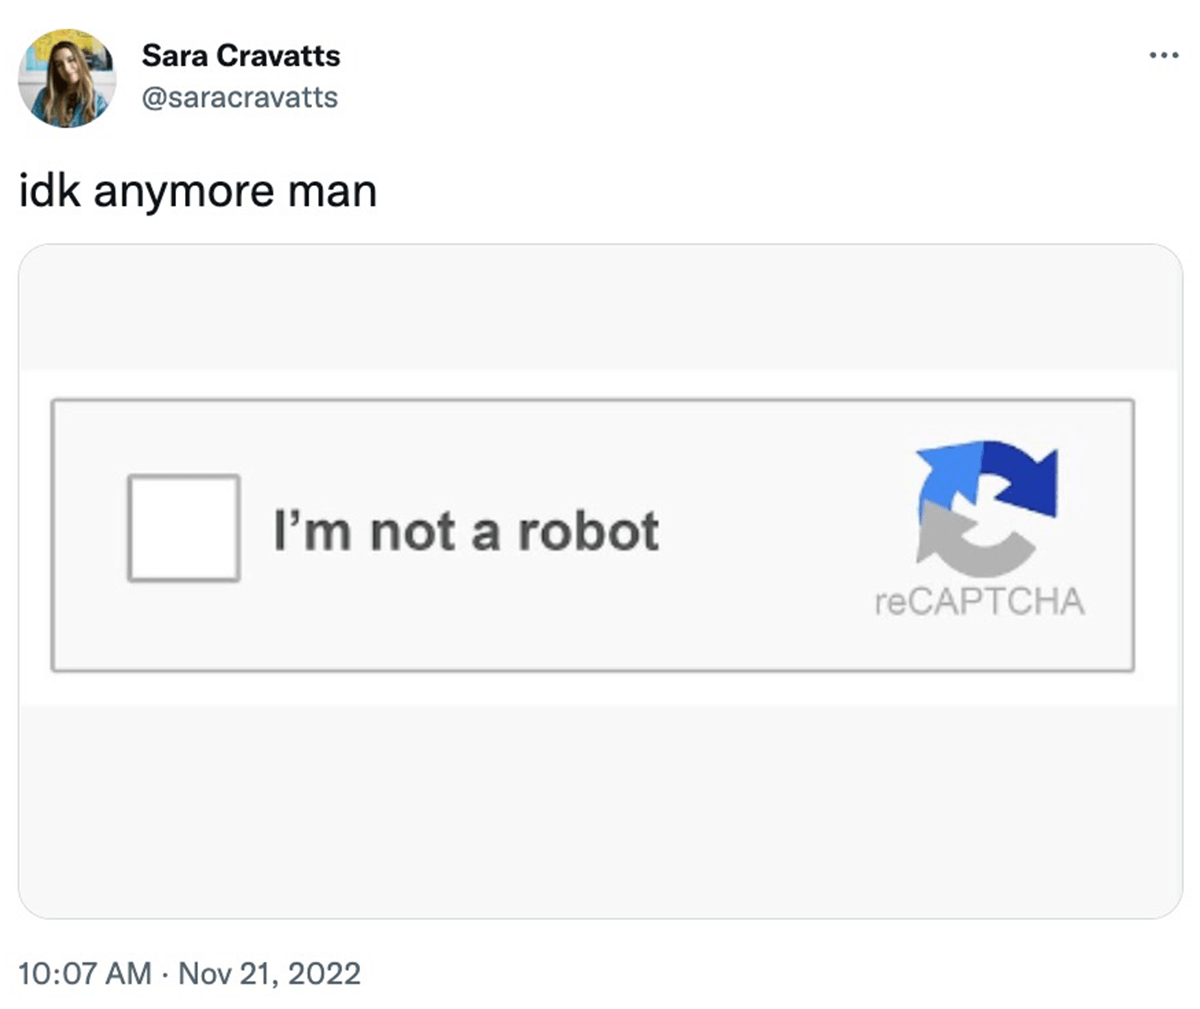 @saracravatts on Twitter: idk anymore man and an image of a captca that says 'I'm not a robot'